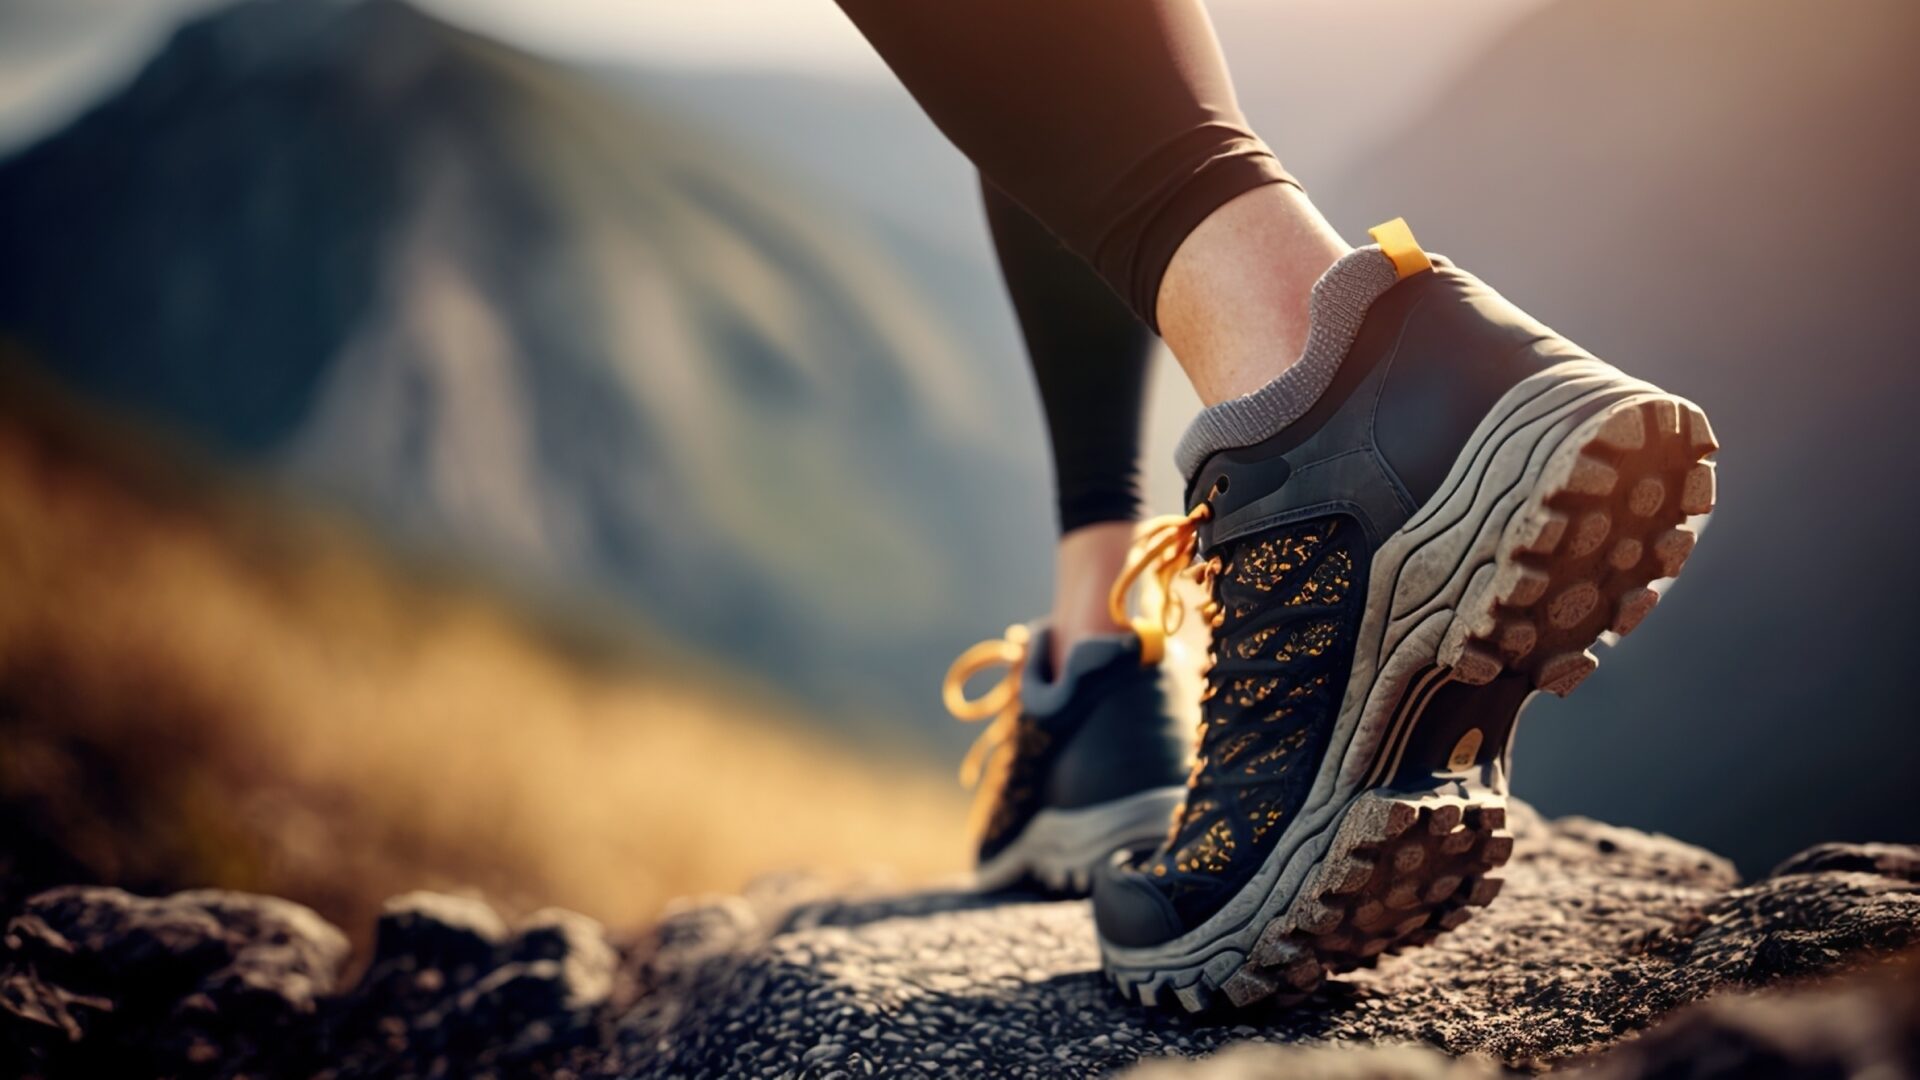 11 Best Hiking Boots For Plantar Fasciitis Physical Therapist Recommended